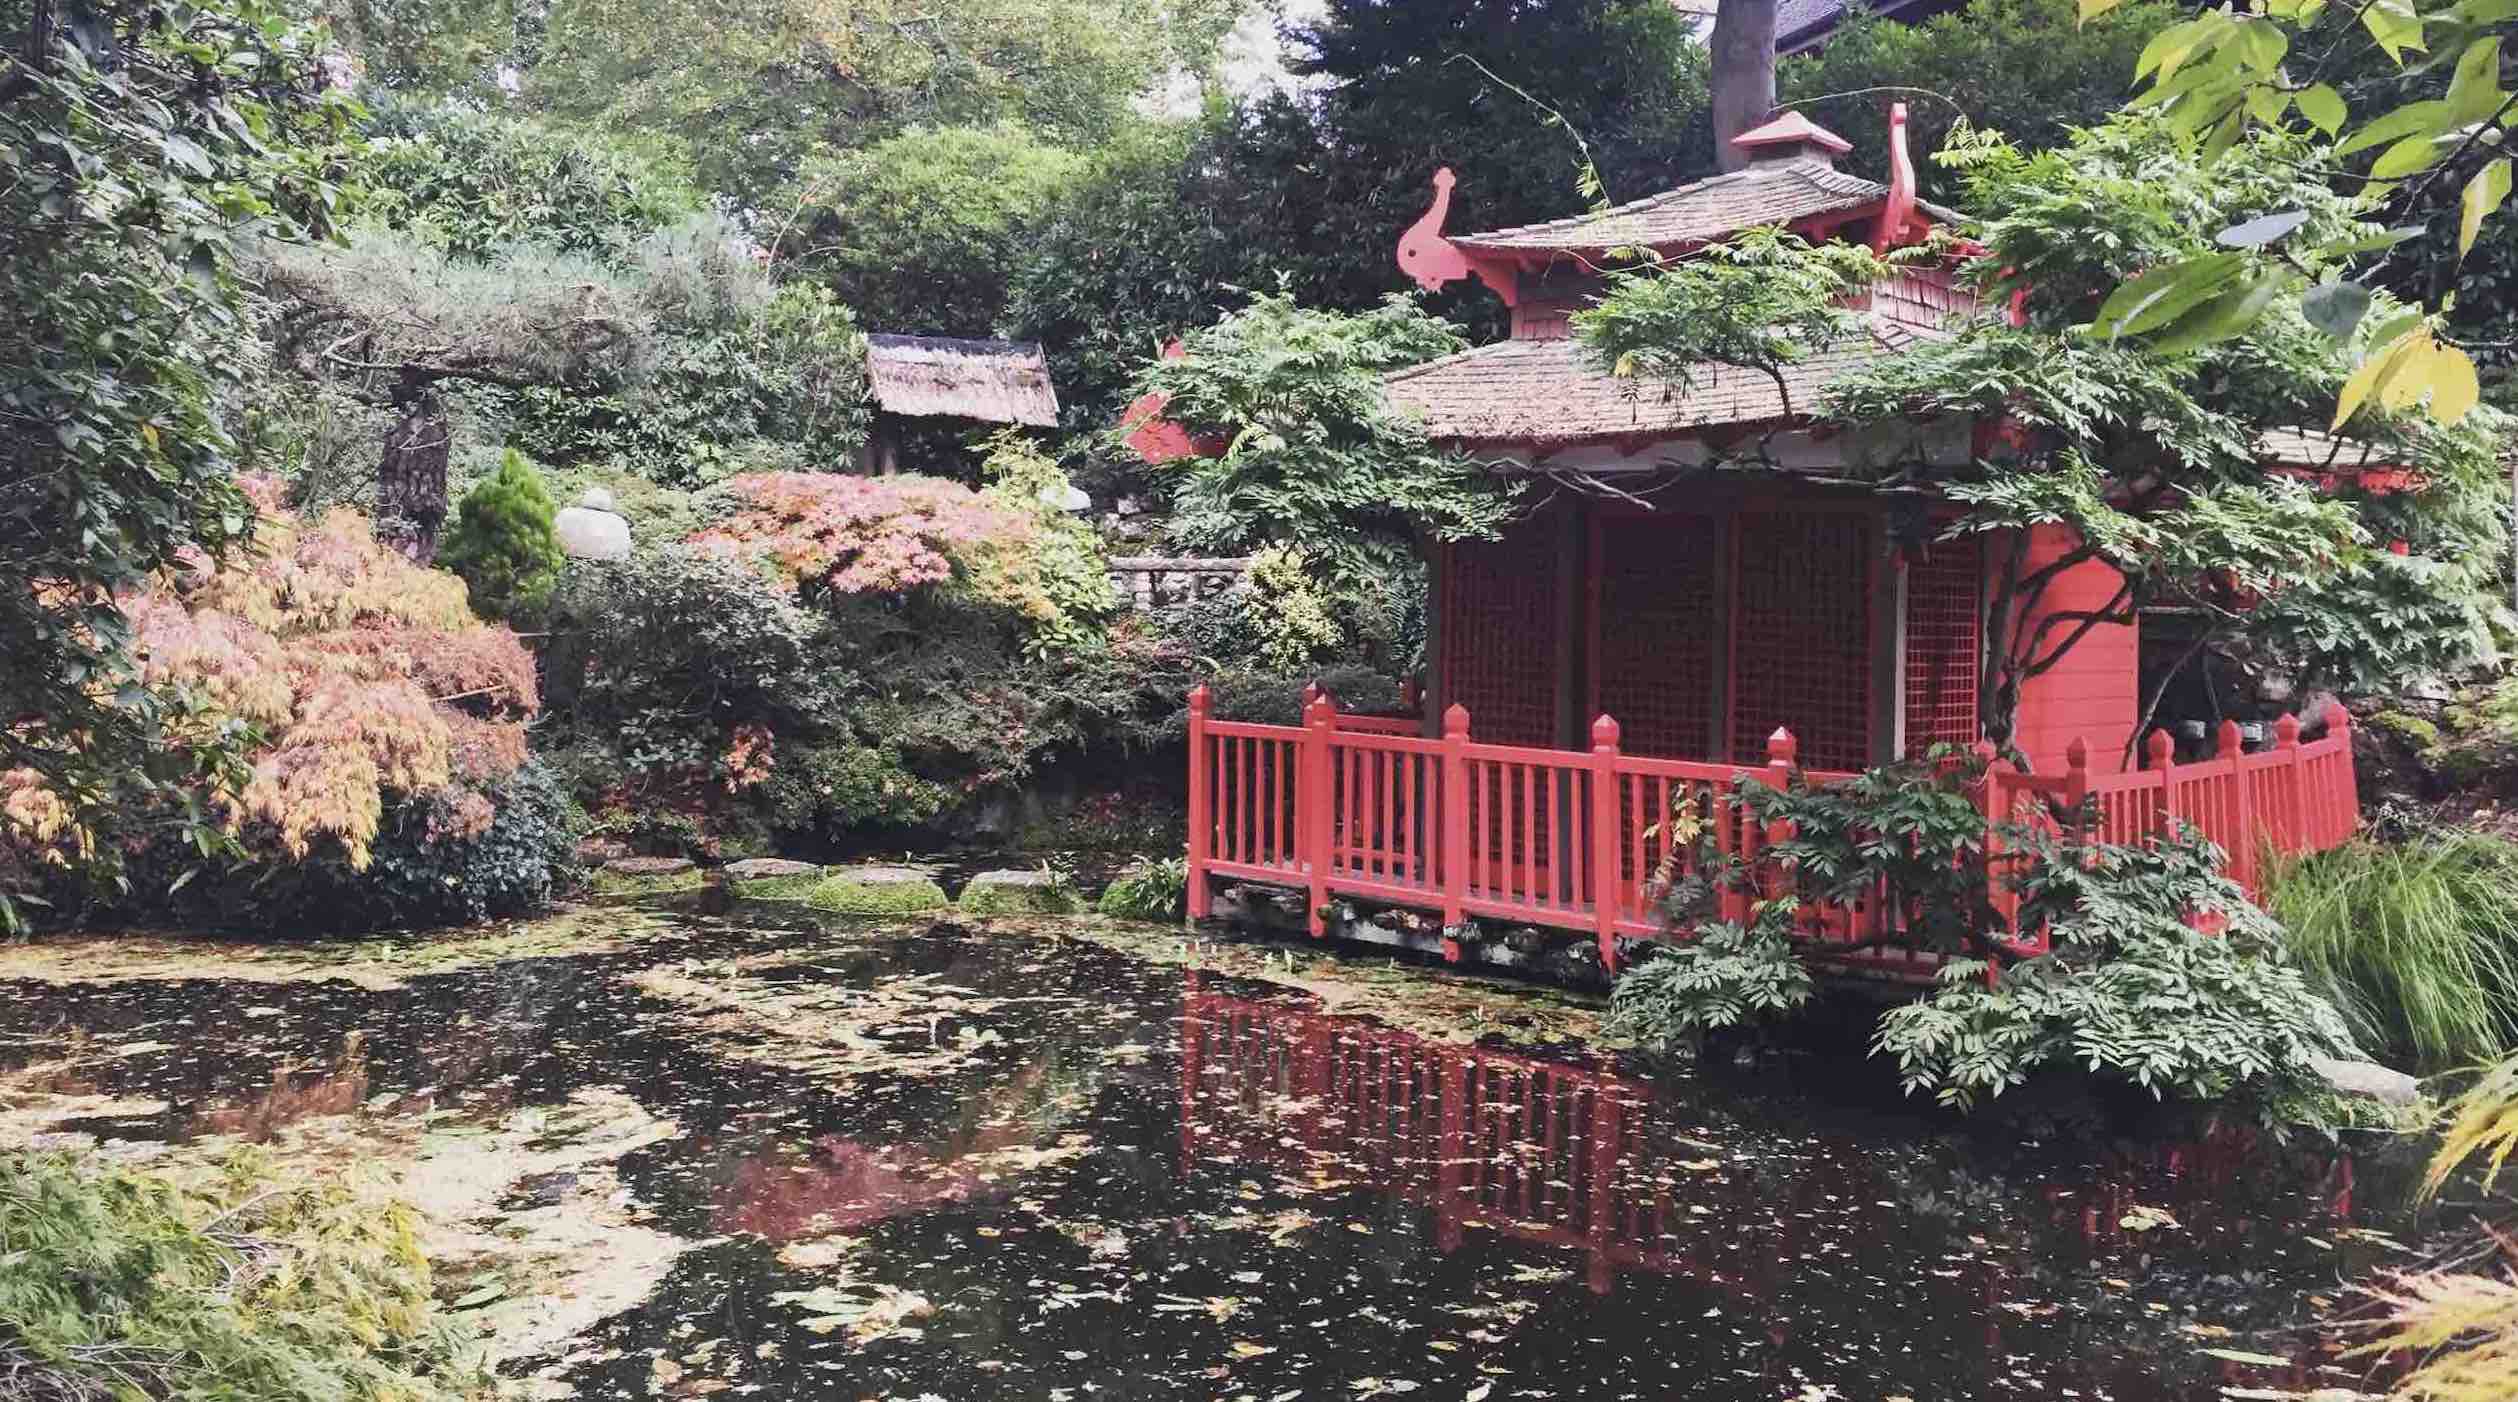 Avisit to Compton Acres with Japanese Garden is one of the top things to do in Bournemouth